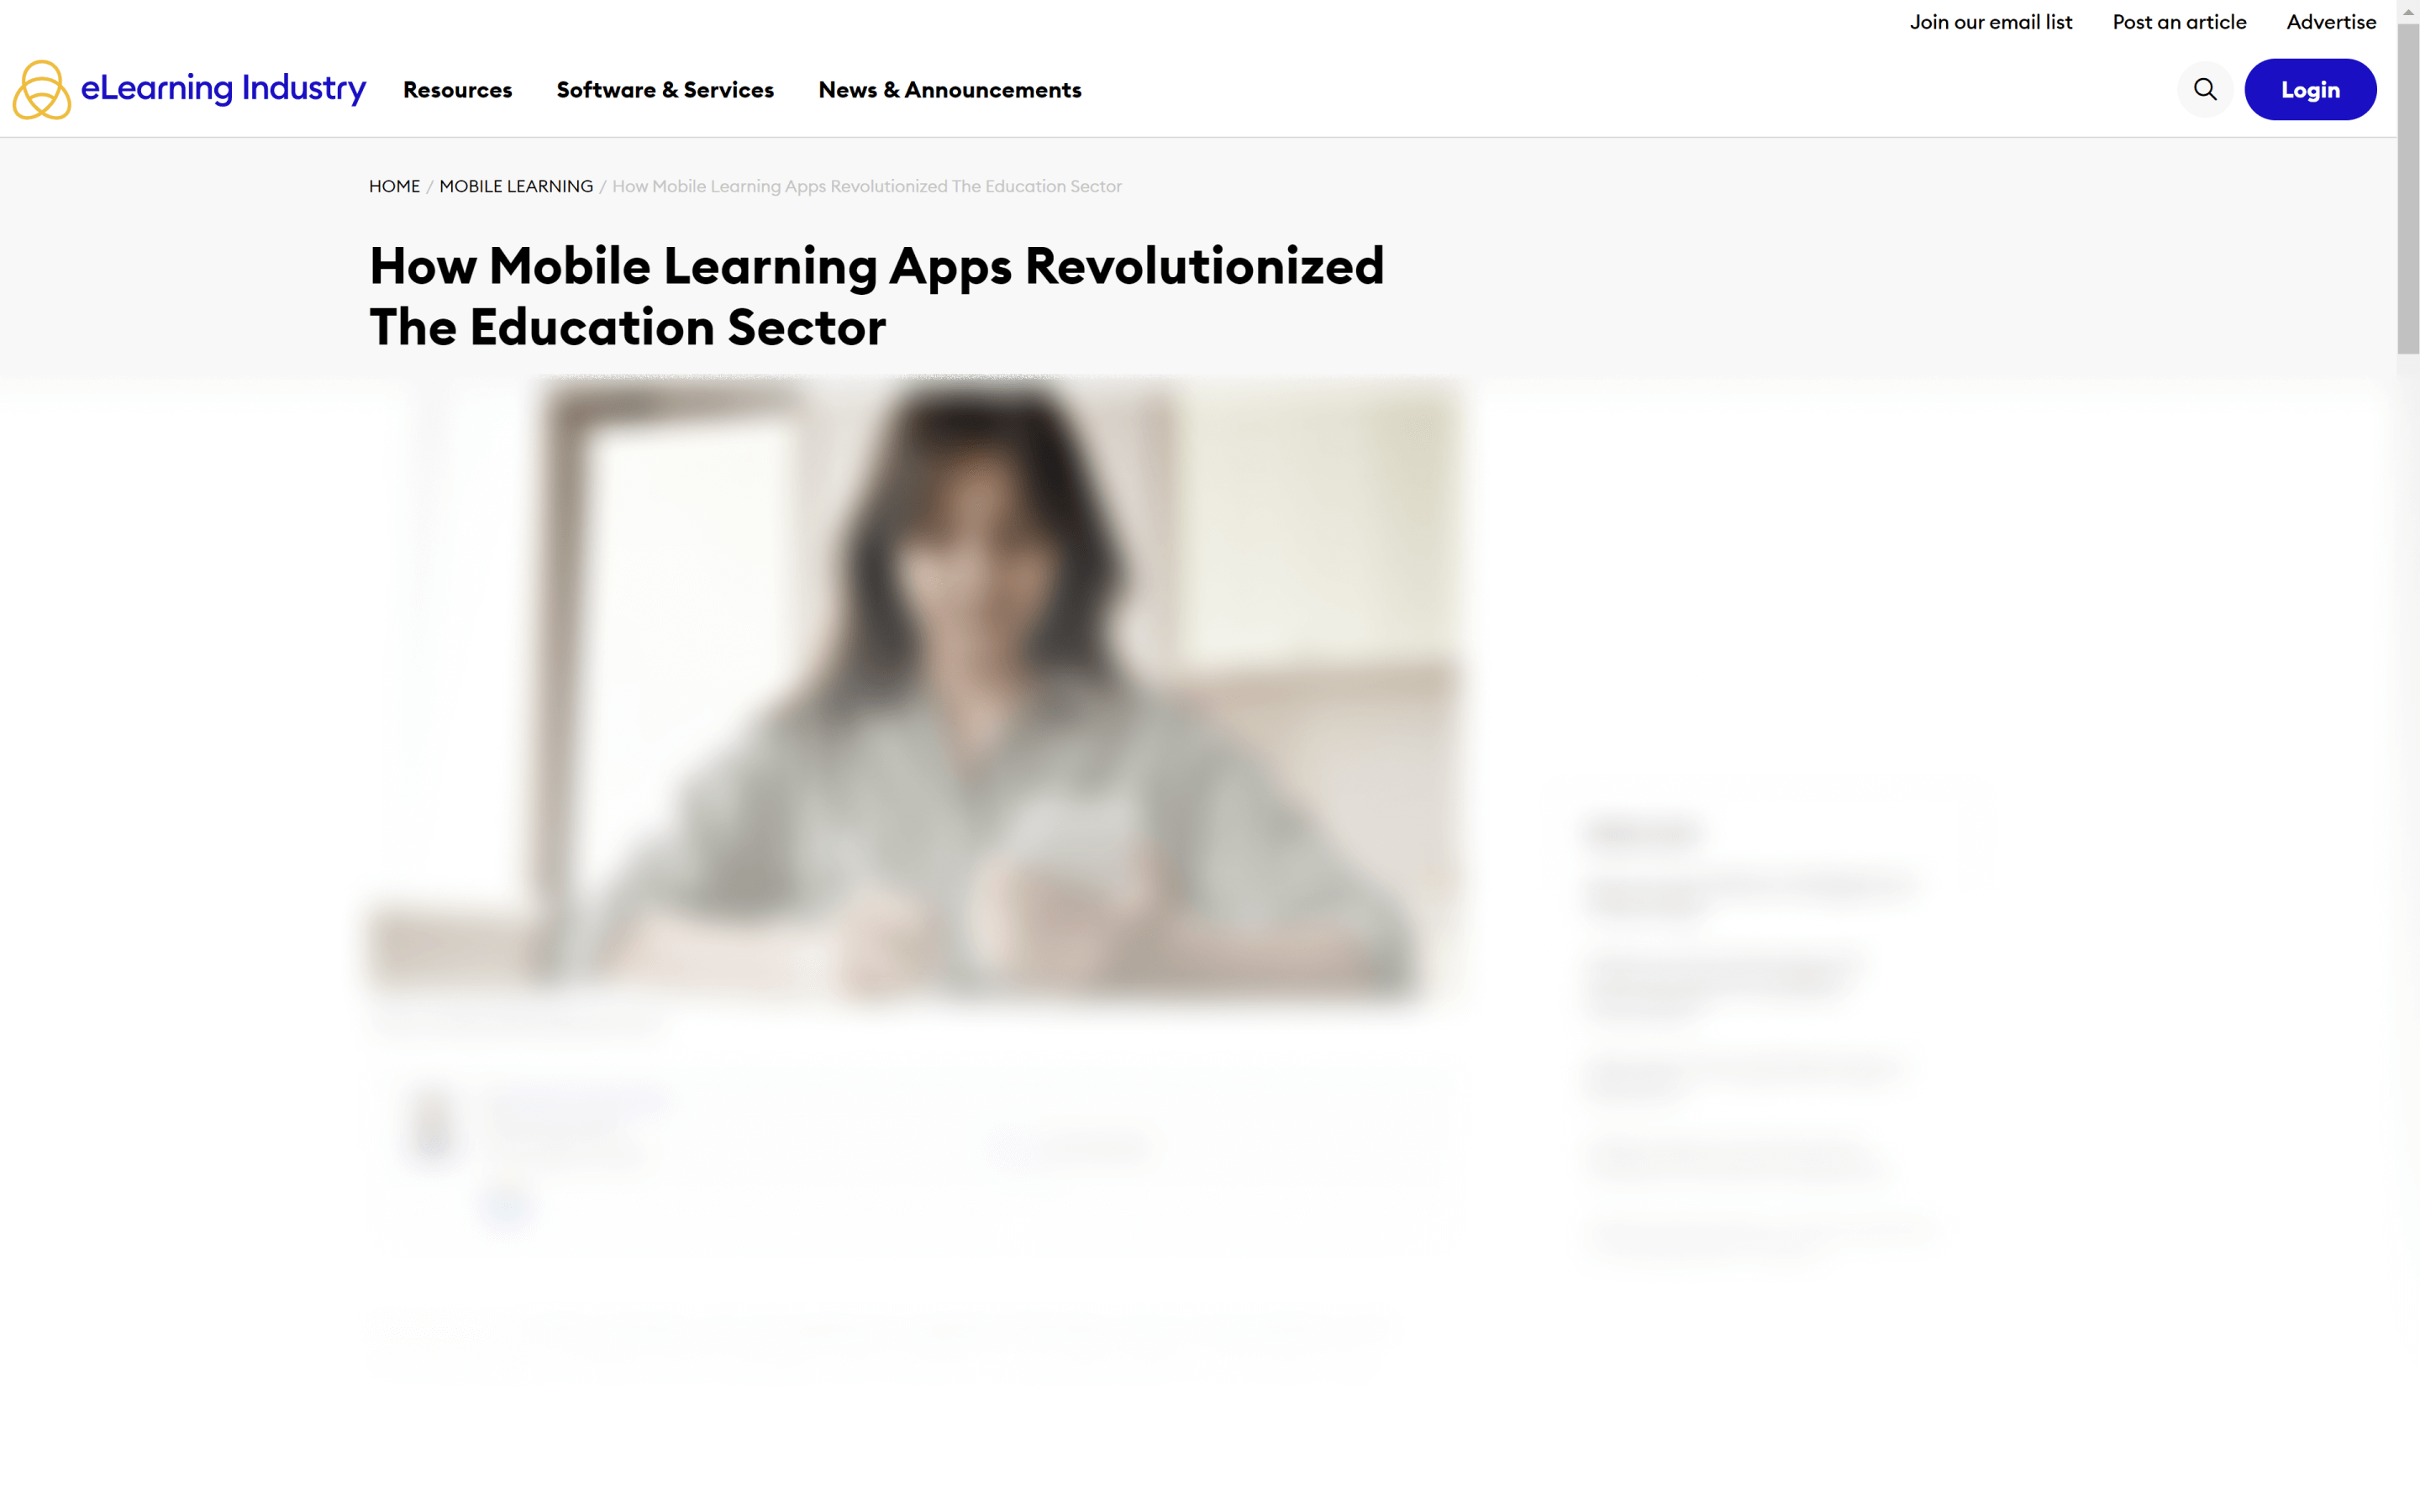 How mobile learning apps Revolutionized the education sector